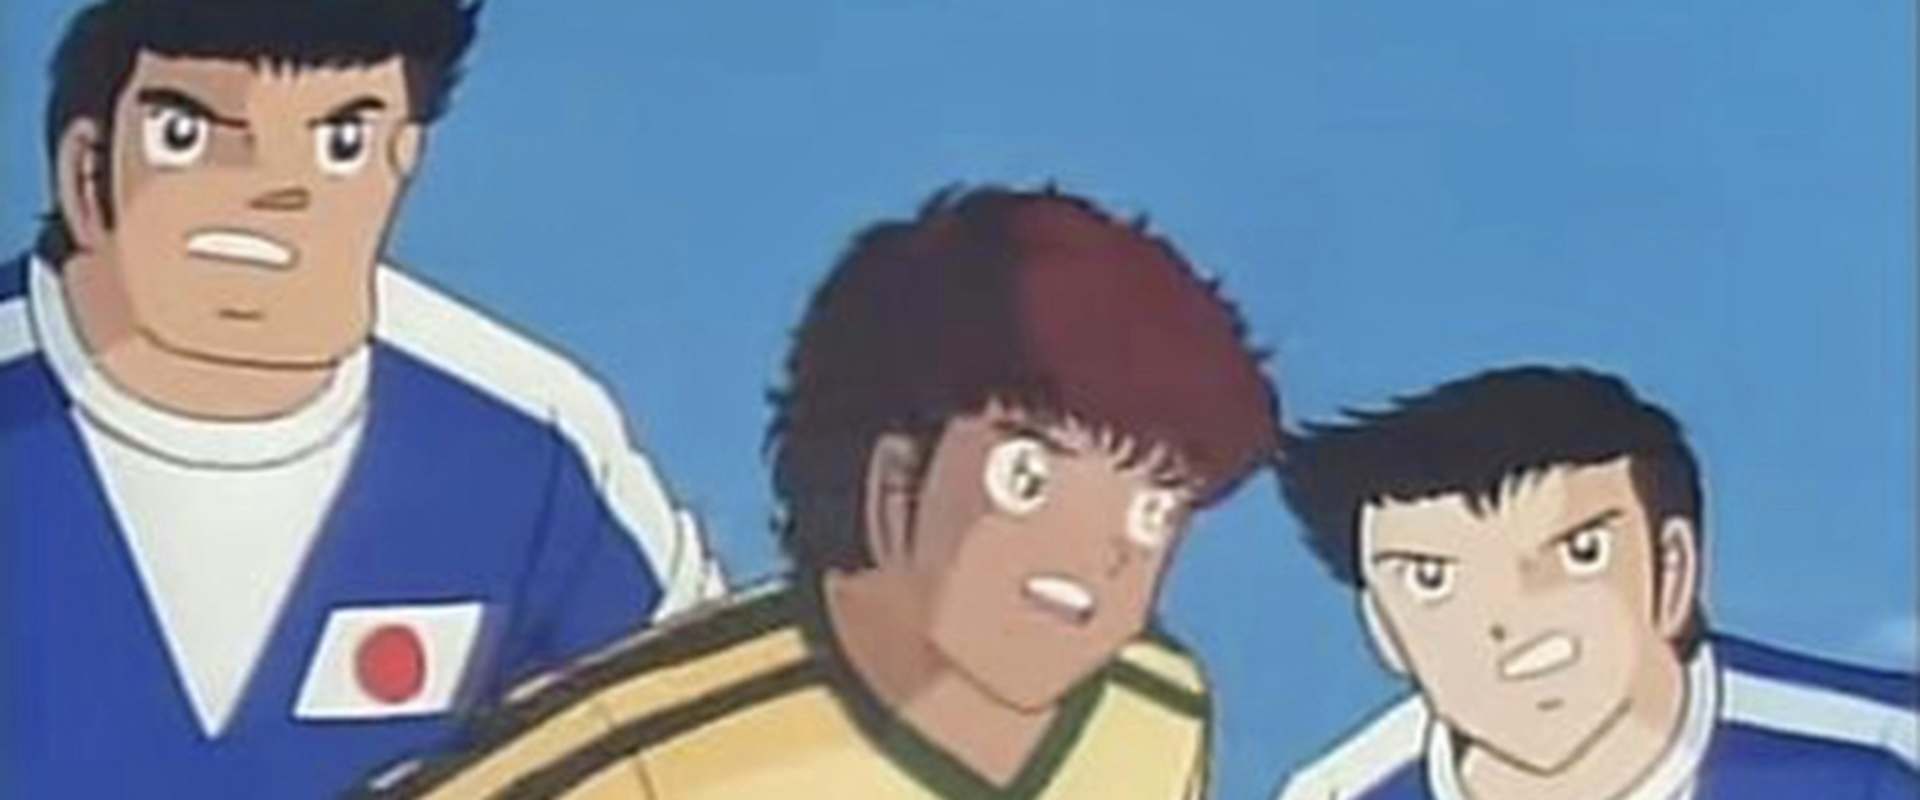 Captain Tsubasa Movie 04: The great world competition The Junior World Cup background 1